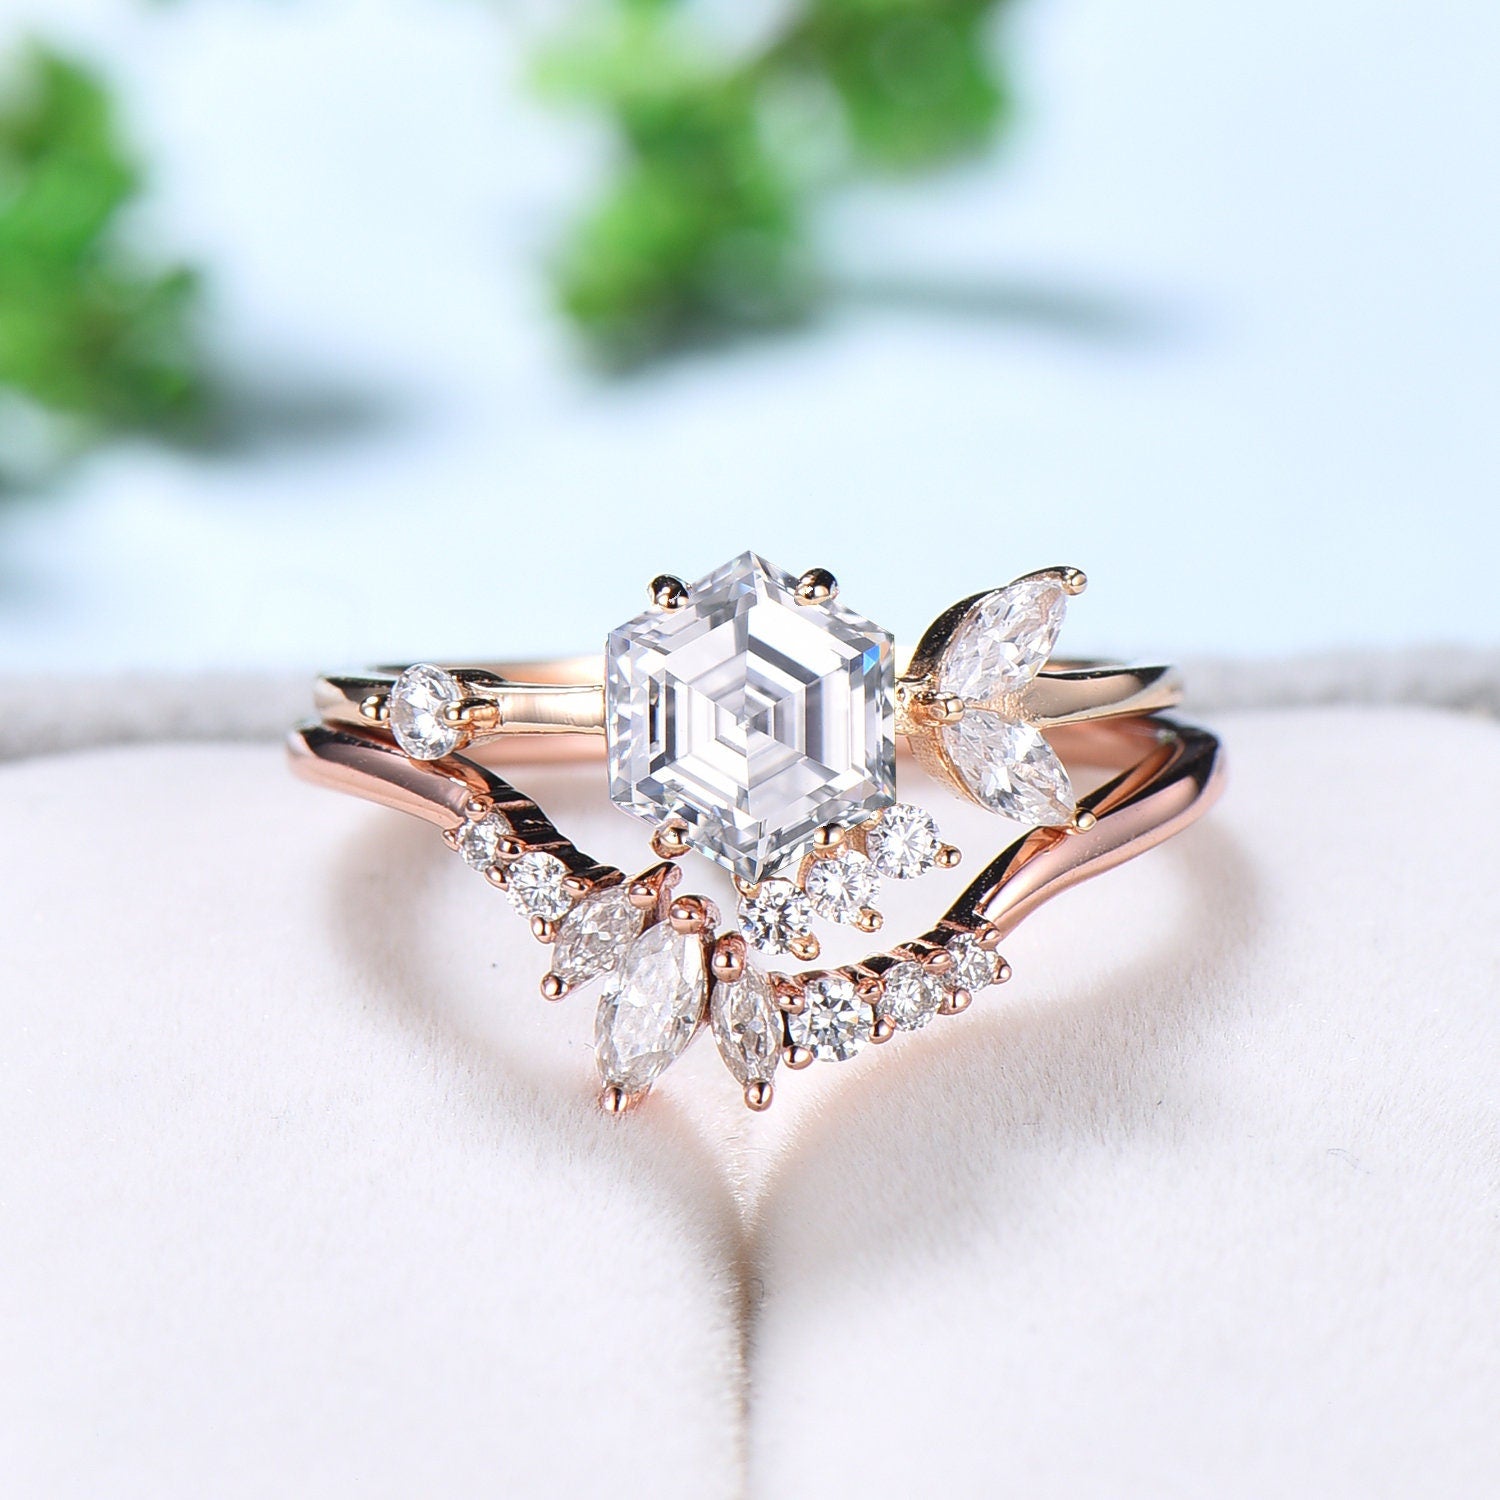 Vintage Unique Blue Sapphire Engagement Ring Set 14K Rose Gold Three Stone Moissanite Ring Minimalist Bridal Wedding Ring Set for Women Gift Only